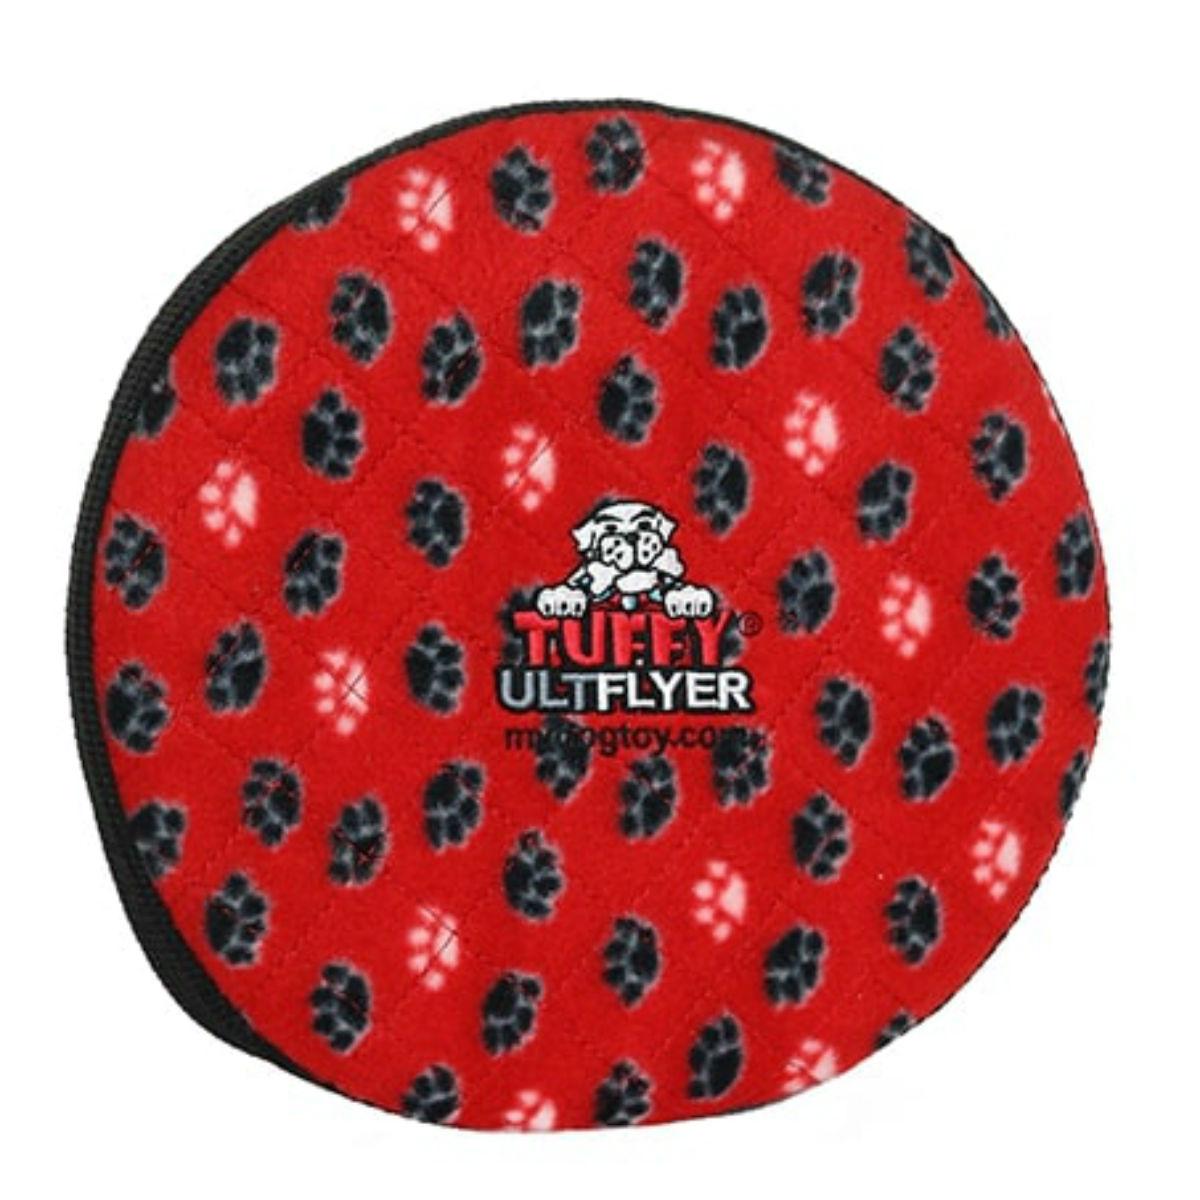 Tuffy Ultimate Flyer Dog Toy - Red Paw Prints